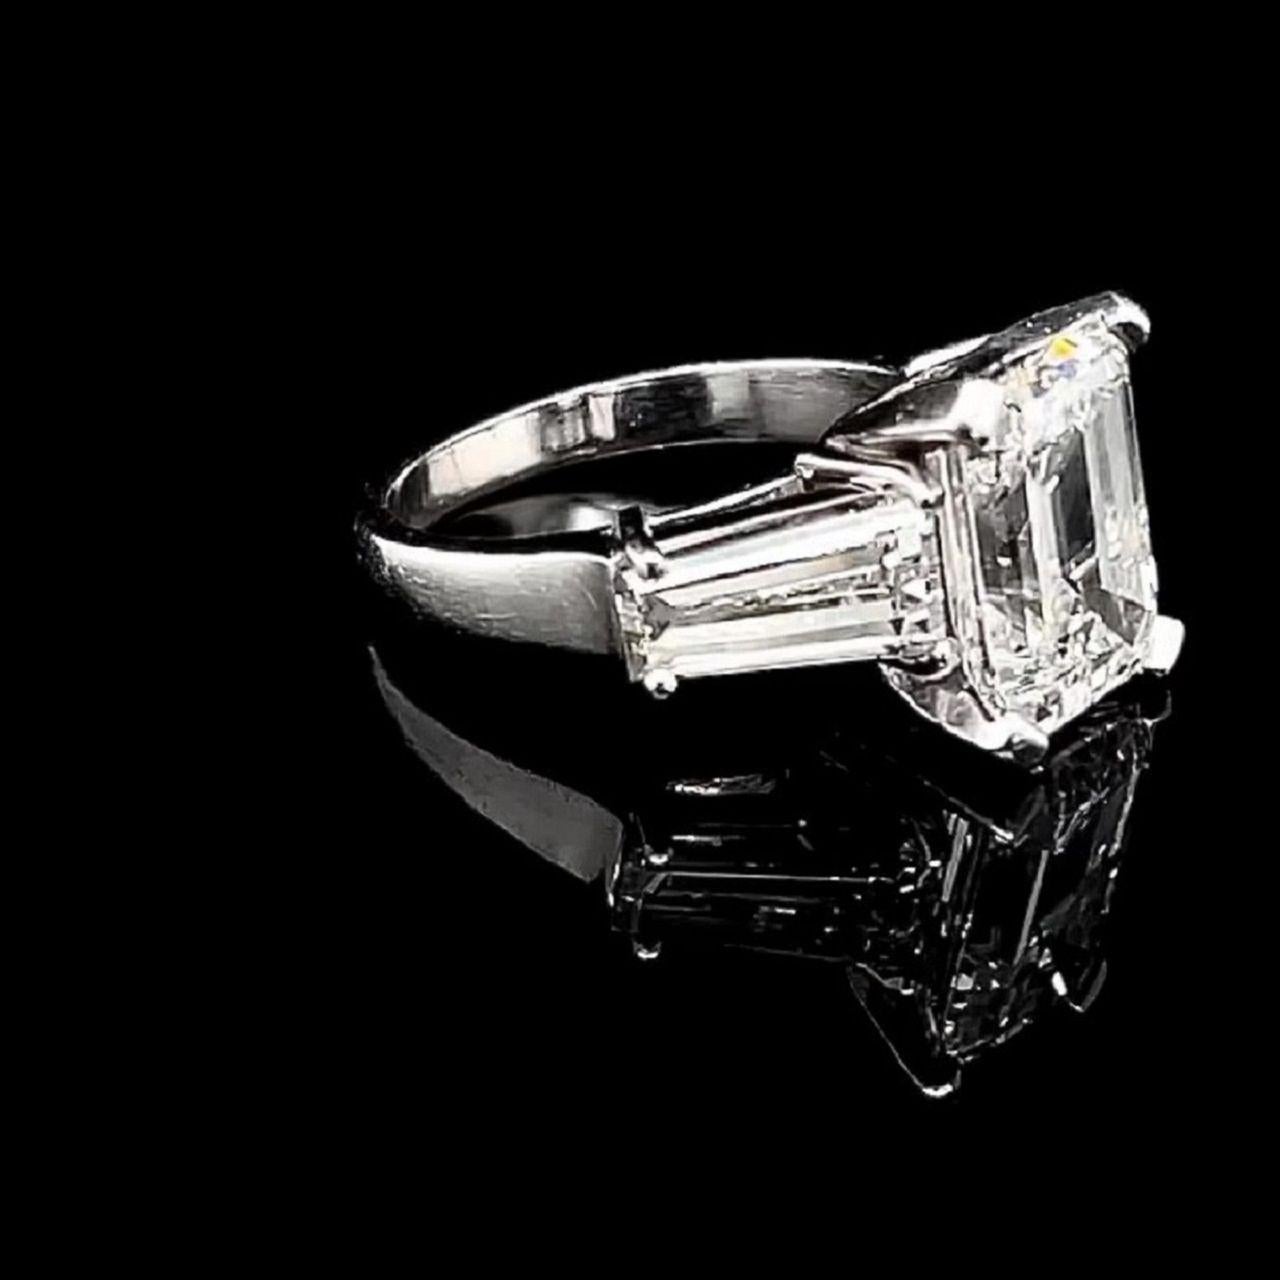 Contemporary Diamond 6.76 Carats Emerald Cut Engagement Ring with GIA Certificate